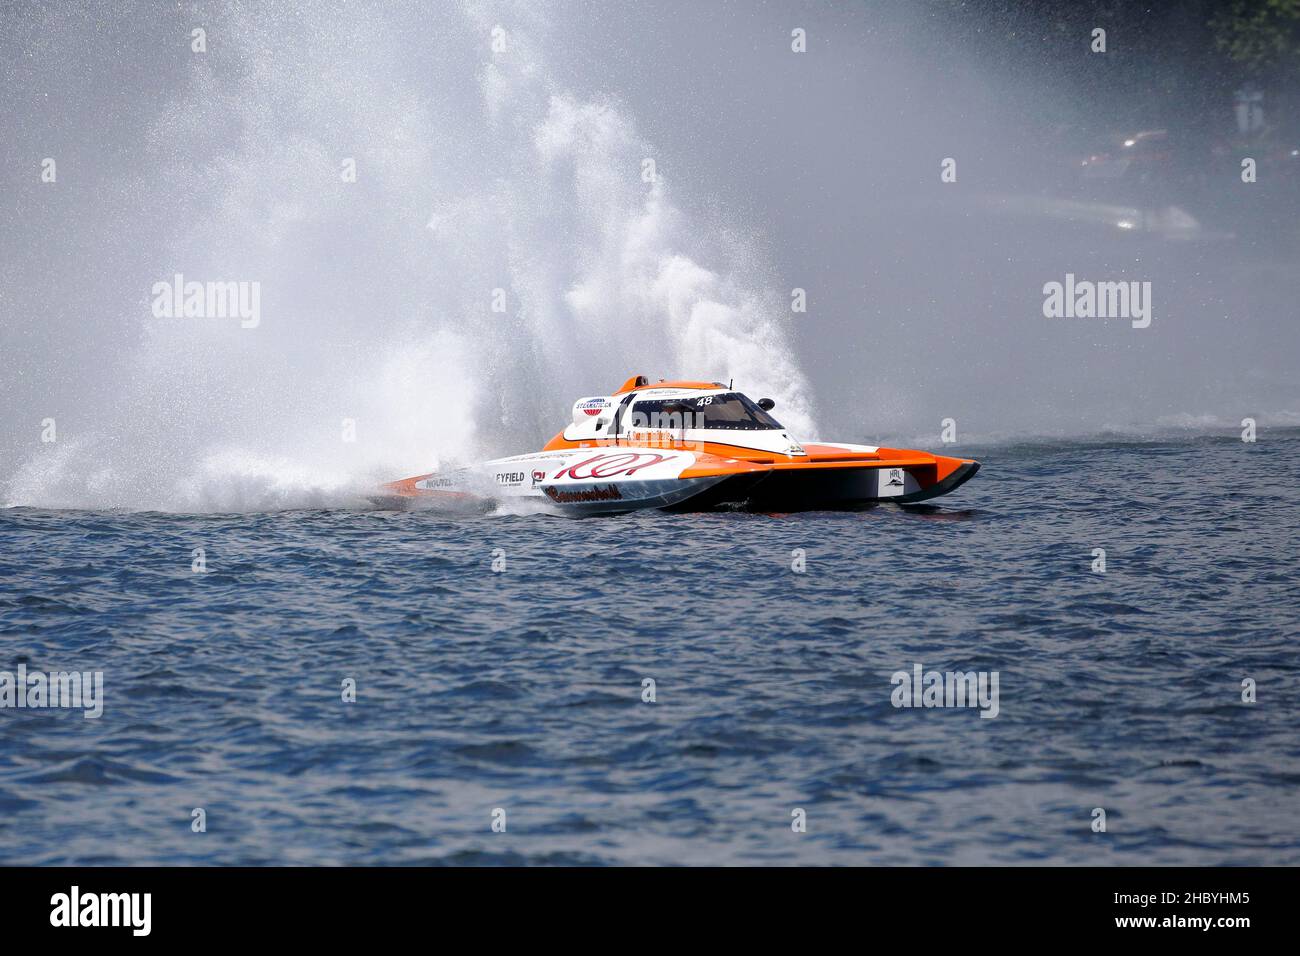 1983 Thunder on The Lake Sea Galley Emerald Cup Unlimited Hydroplane Race 